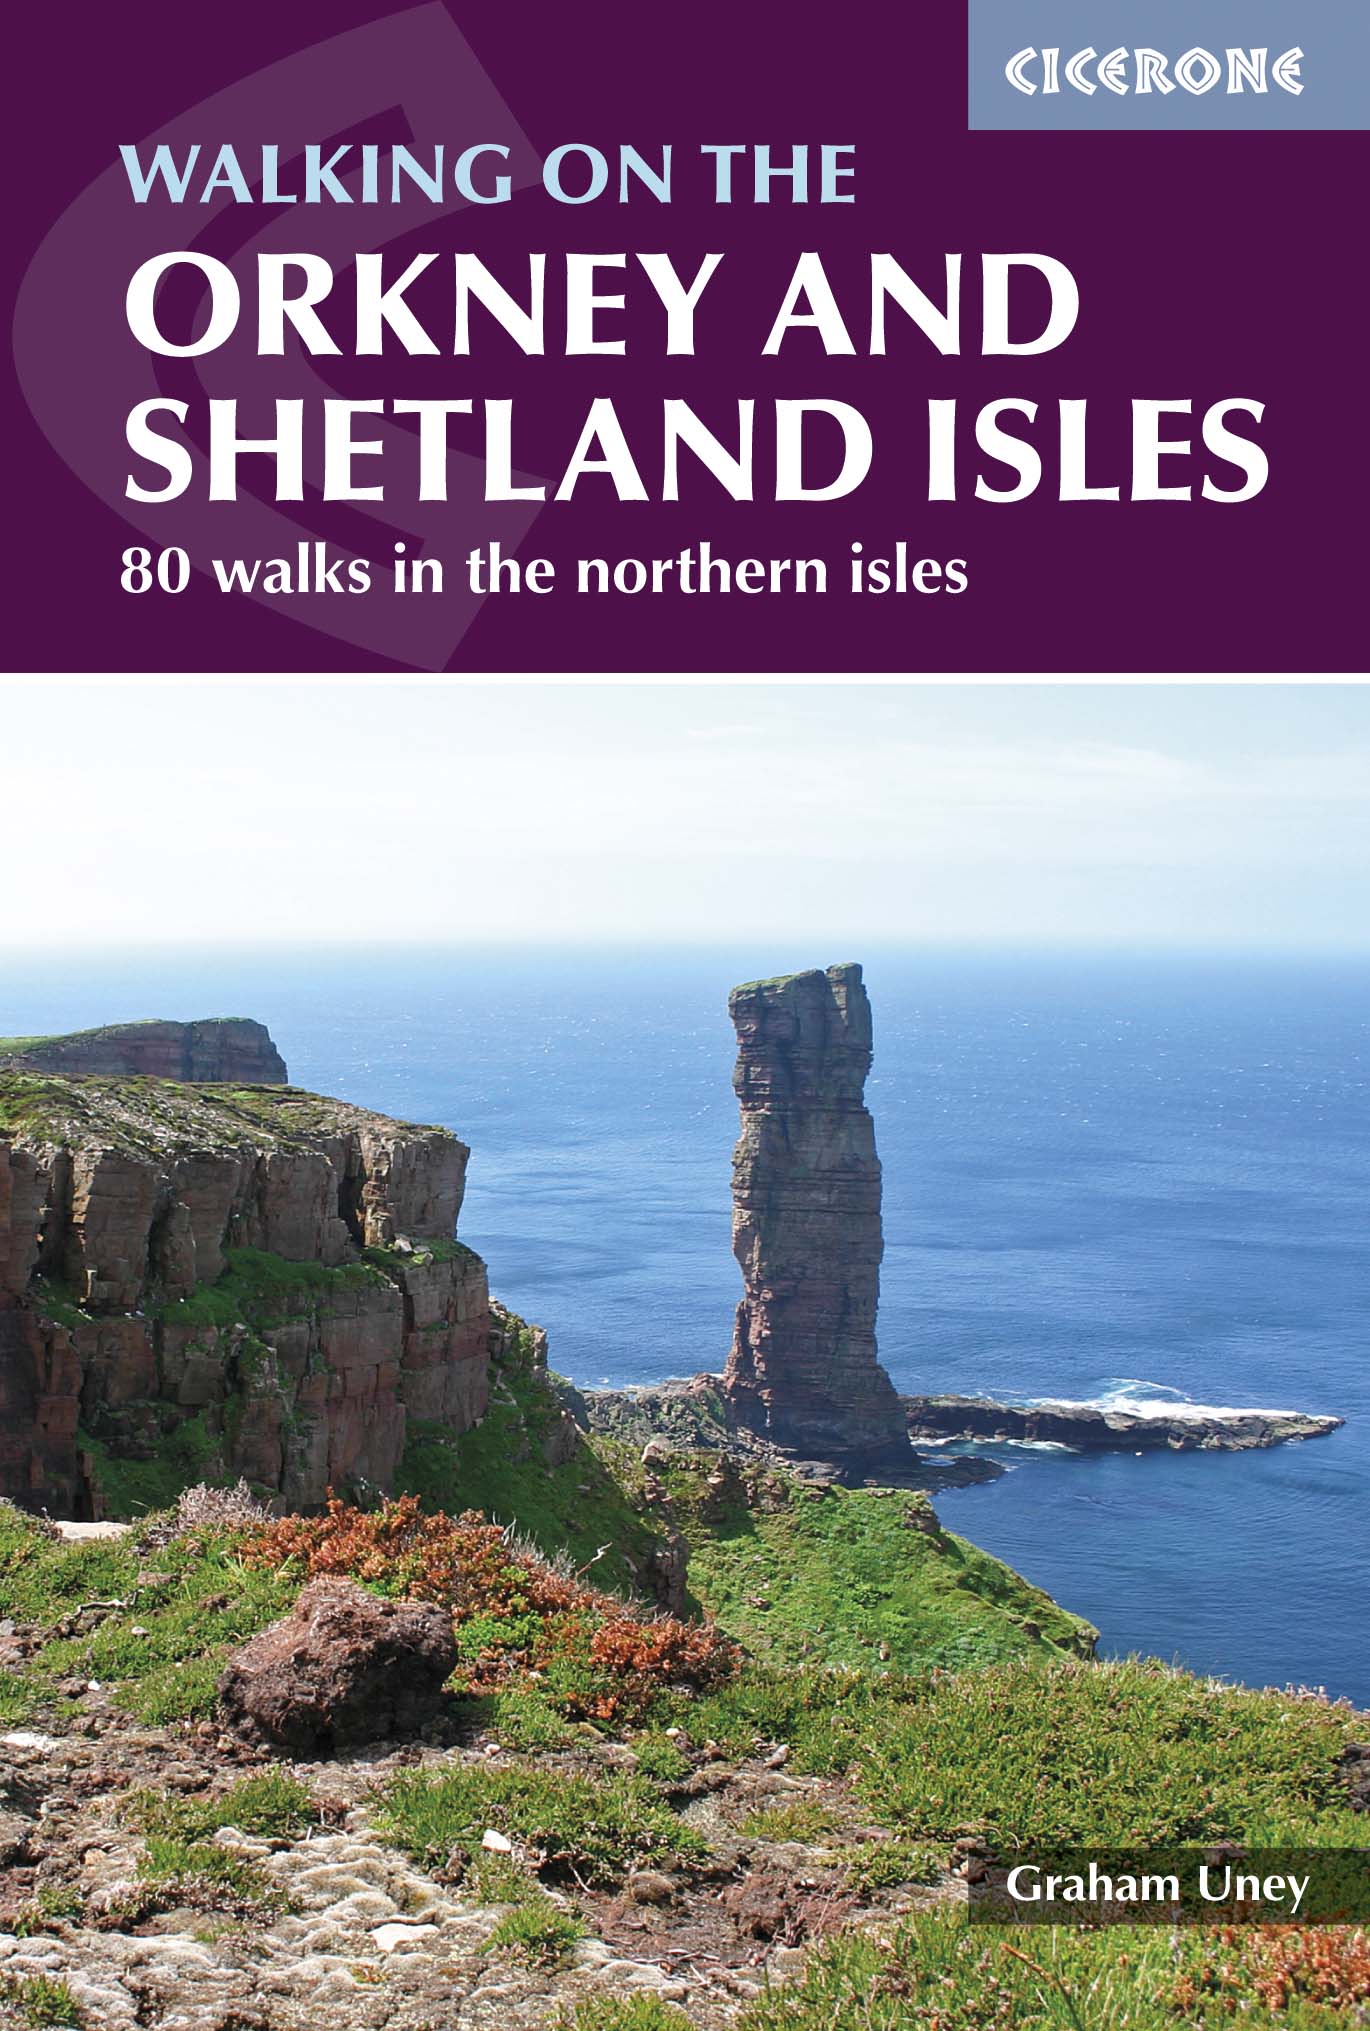 Cicerone Walking on Orkney and Shetland Isles